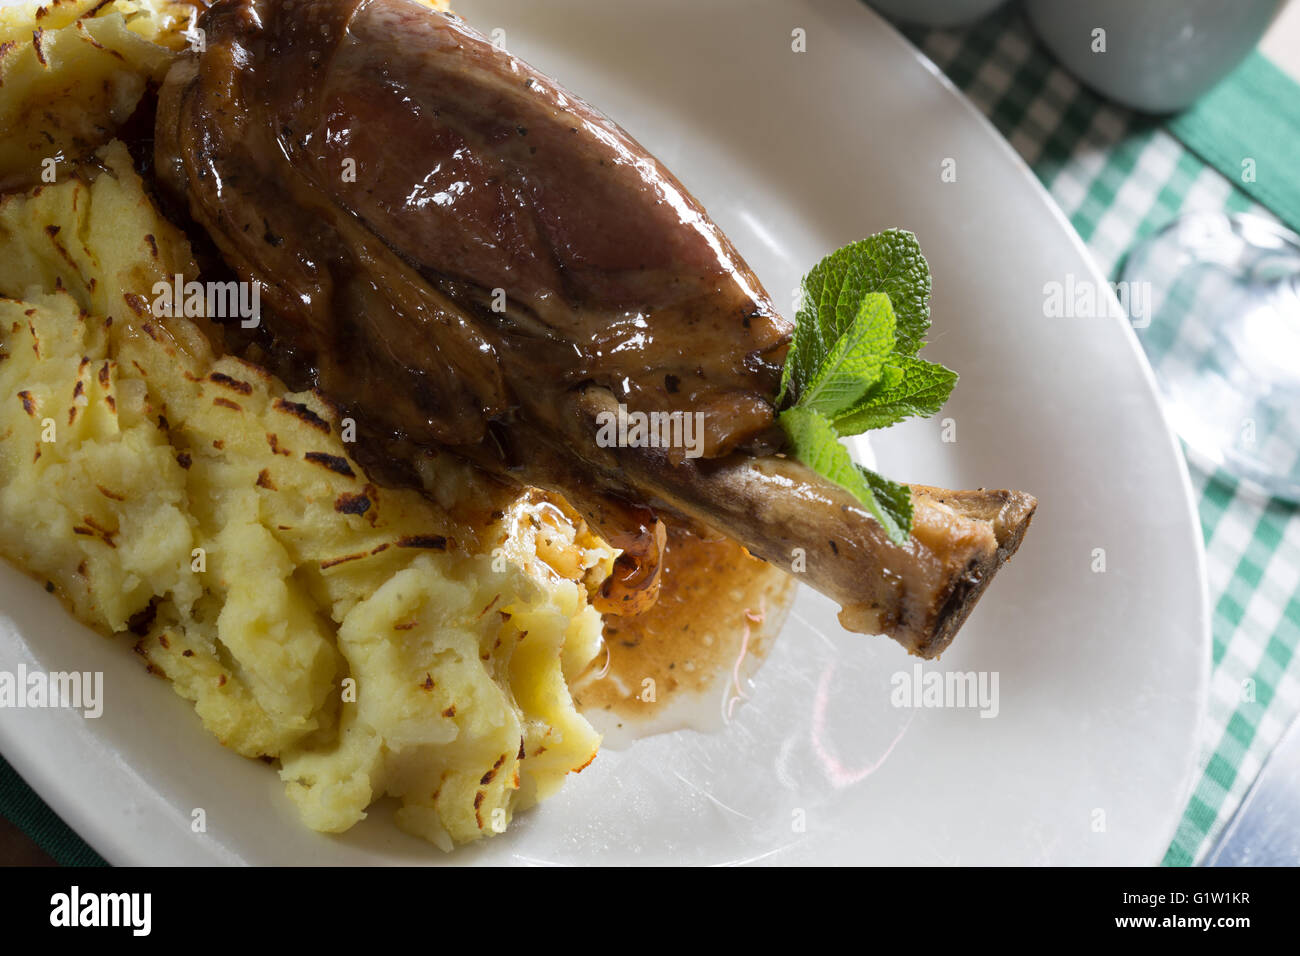 A serving of Lamb Shank with Mint gravy and Mashed Potato. Stock Photo